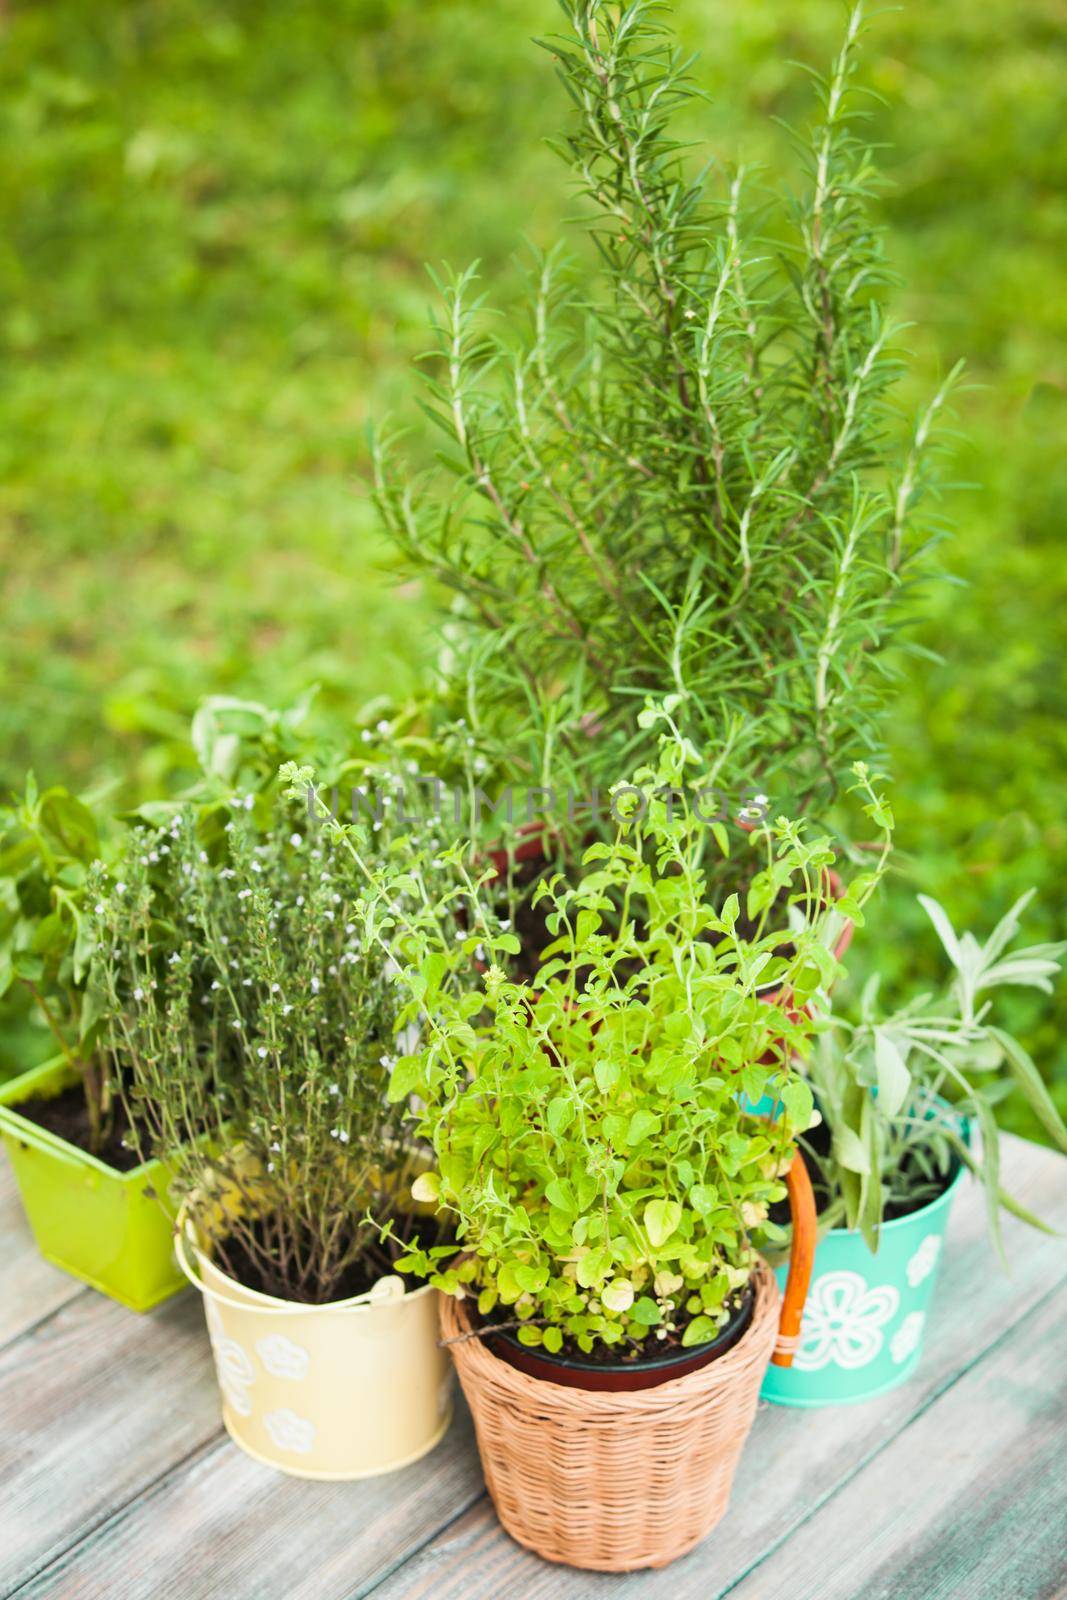 Cozy home garden with herbs - rosemary, sage, basil, thyme and oregano